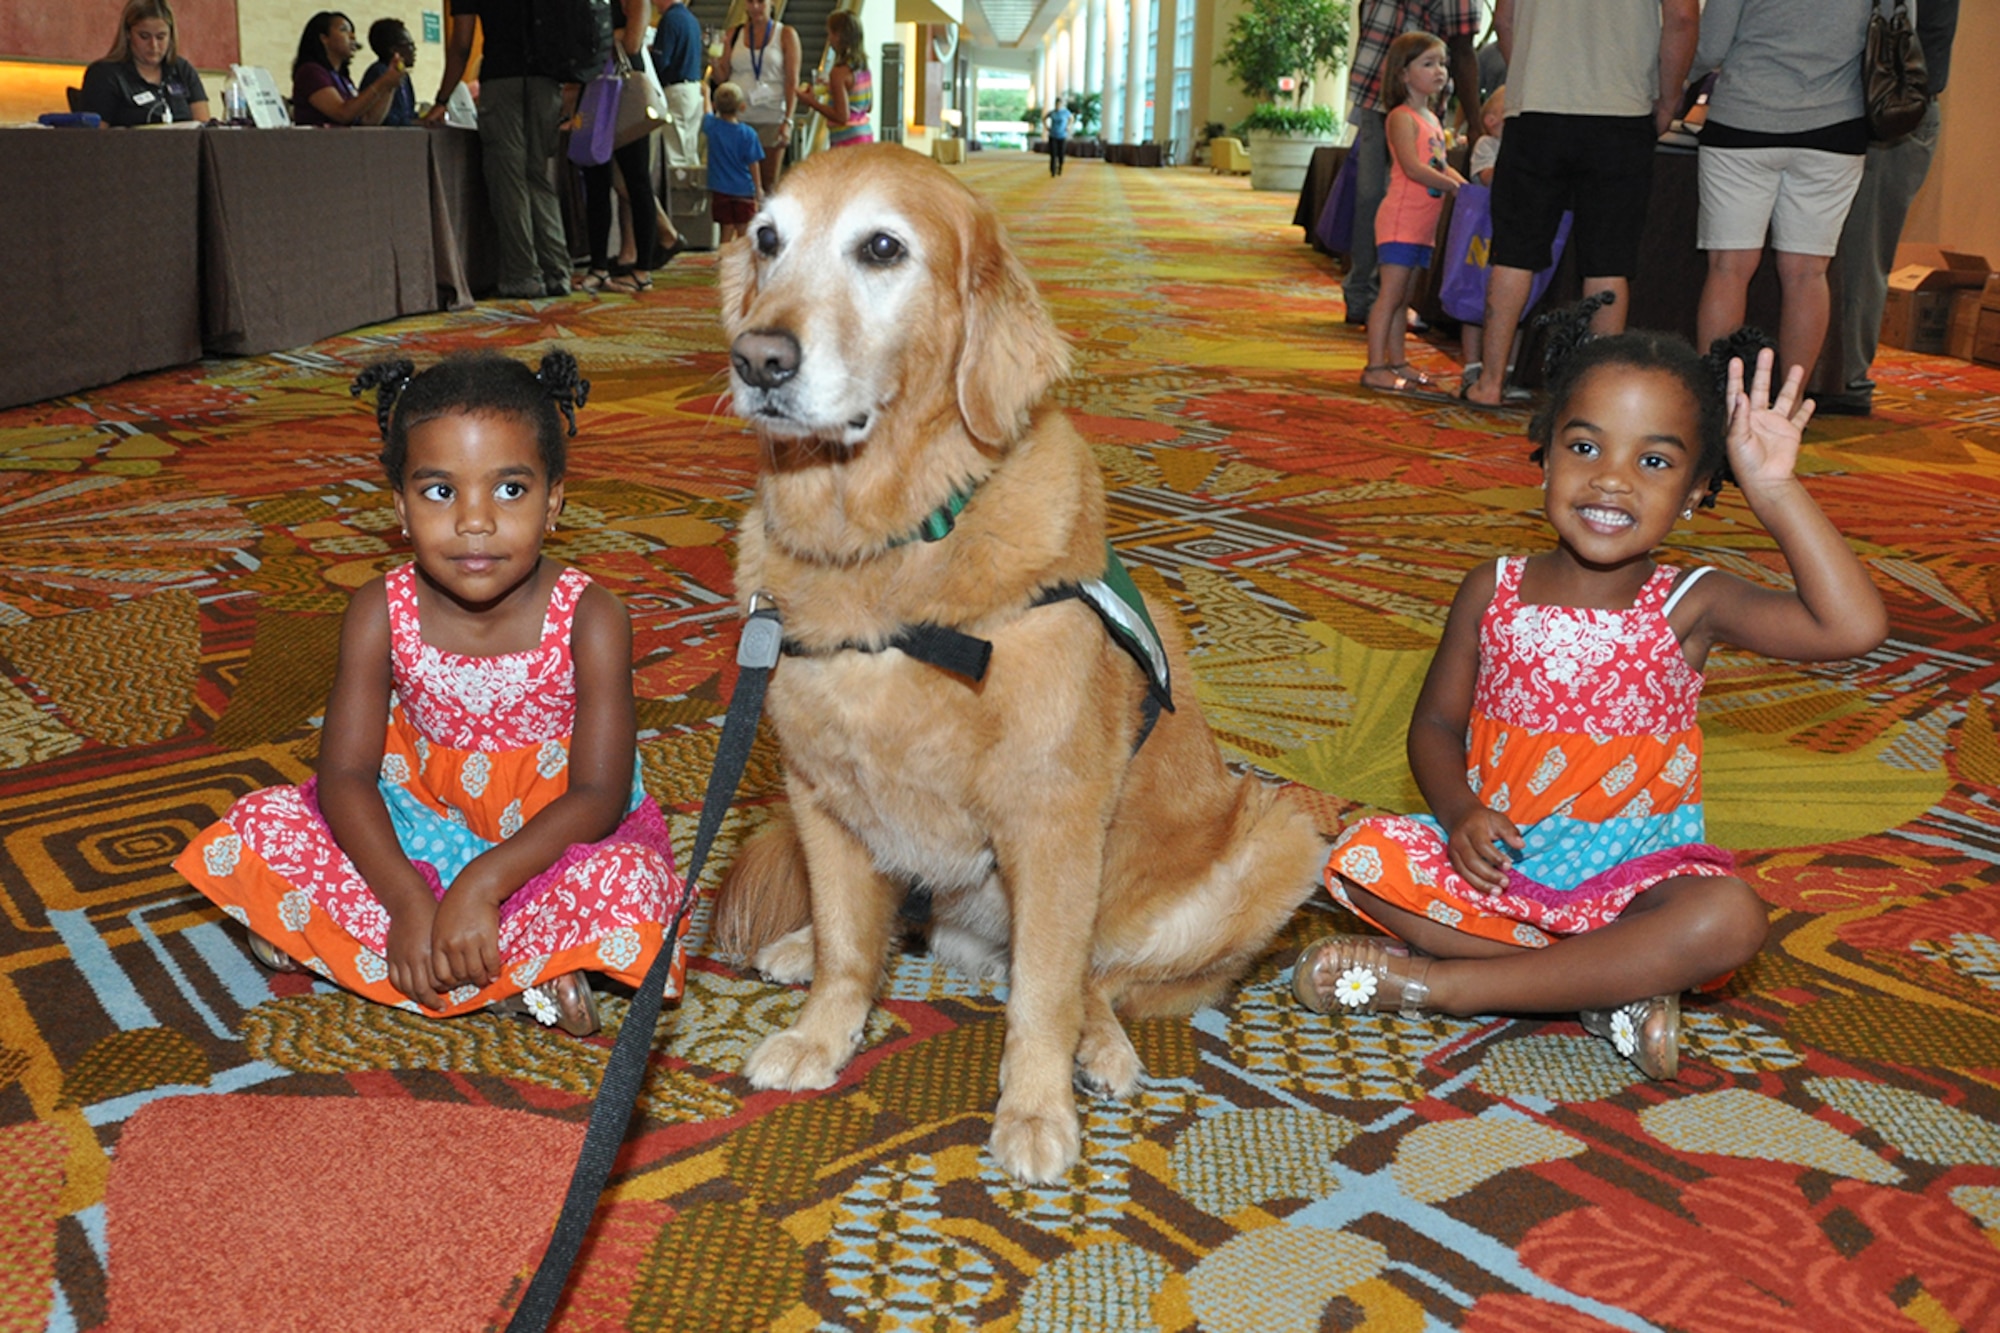 Tess, a Hope Animal-Assisted Crisis Response K-9, interacts with Geneviene and Elizabeth Cherington, daughters of Senior Master Sgt. Anthony Cherington, 482nd Maintenance Squadron flight chief, Homestead Air Reserve Base, Florida, during a Yellow Ribbon event in Orlando, Florida July 25, 2014. The Yellow Ribbon Program promotes the well-being of reservists and their families by connecting them with resources before and after deployments. (U.S. Air Force photo/Master Sgt. James Branch)